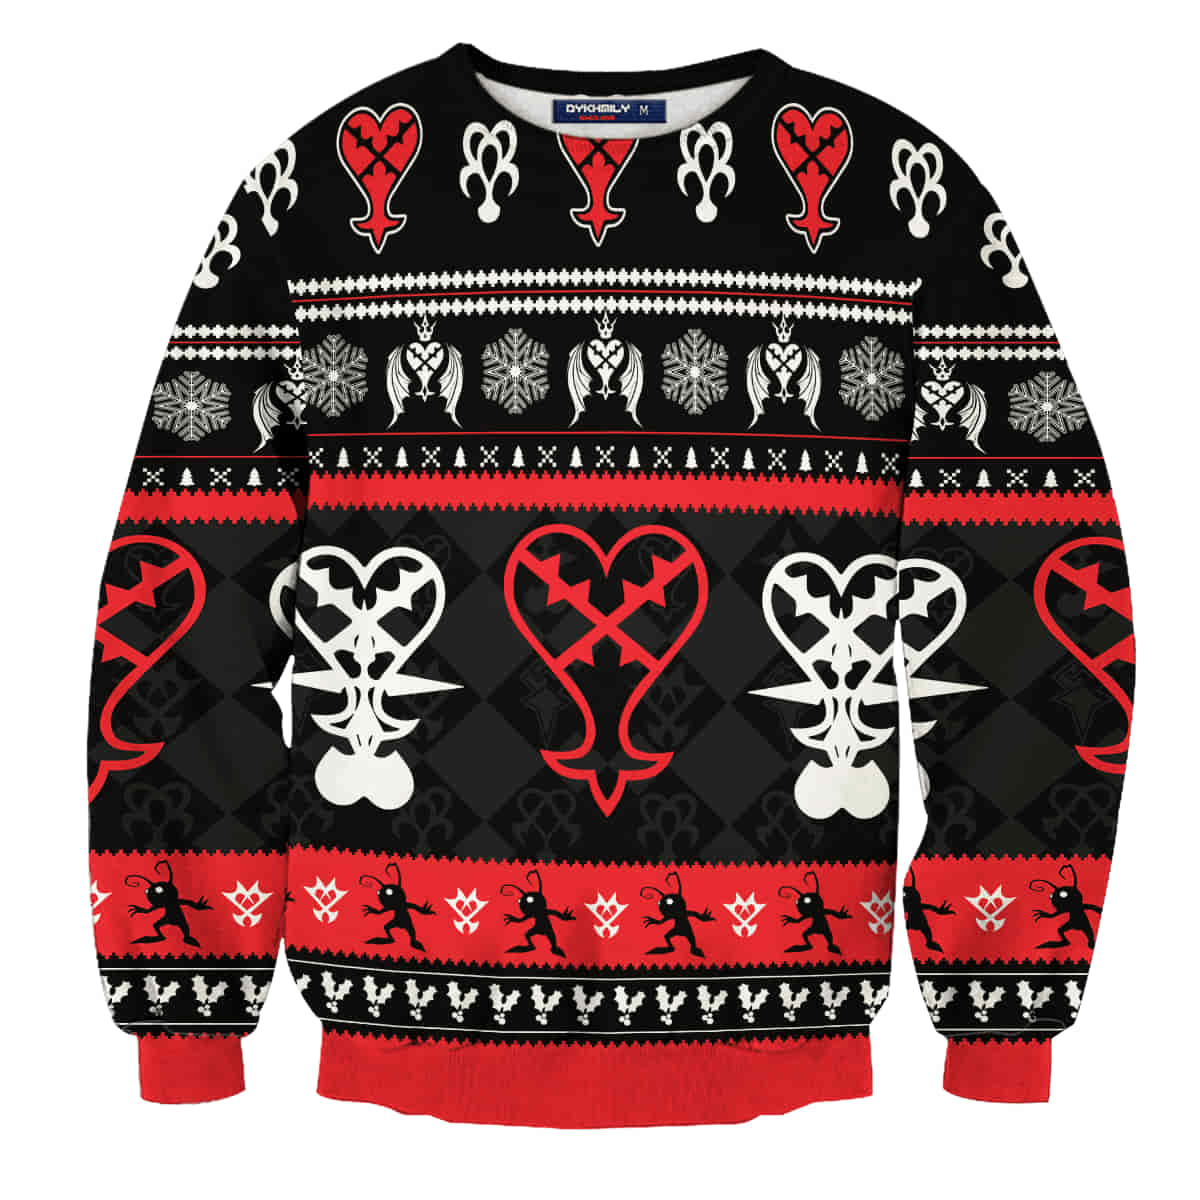 Heartless v2 Sweater, Christmas Wool Knitted 3D Sweater